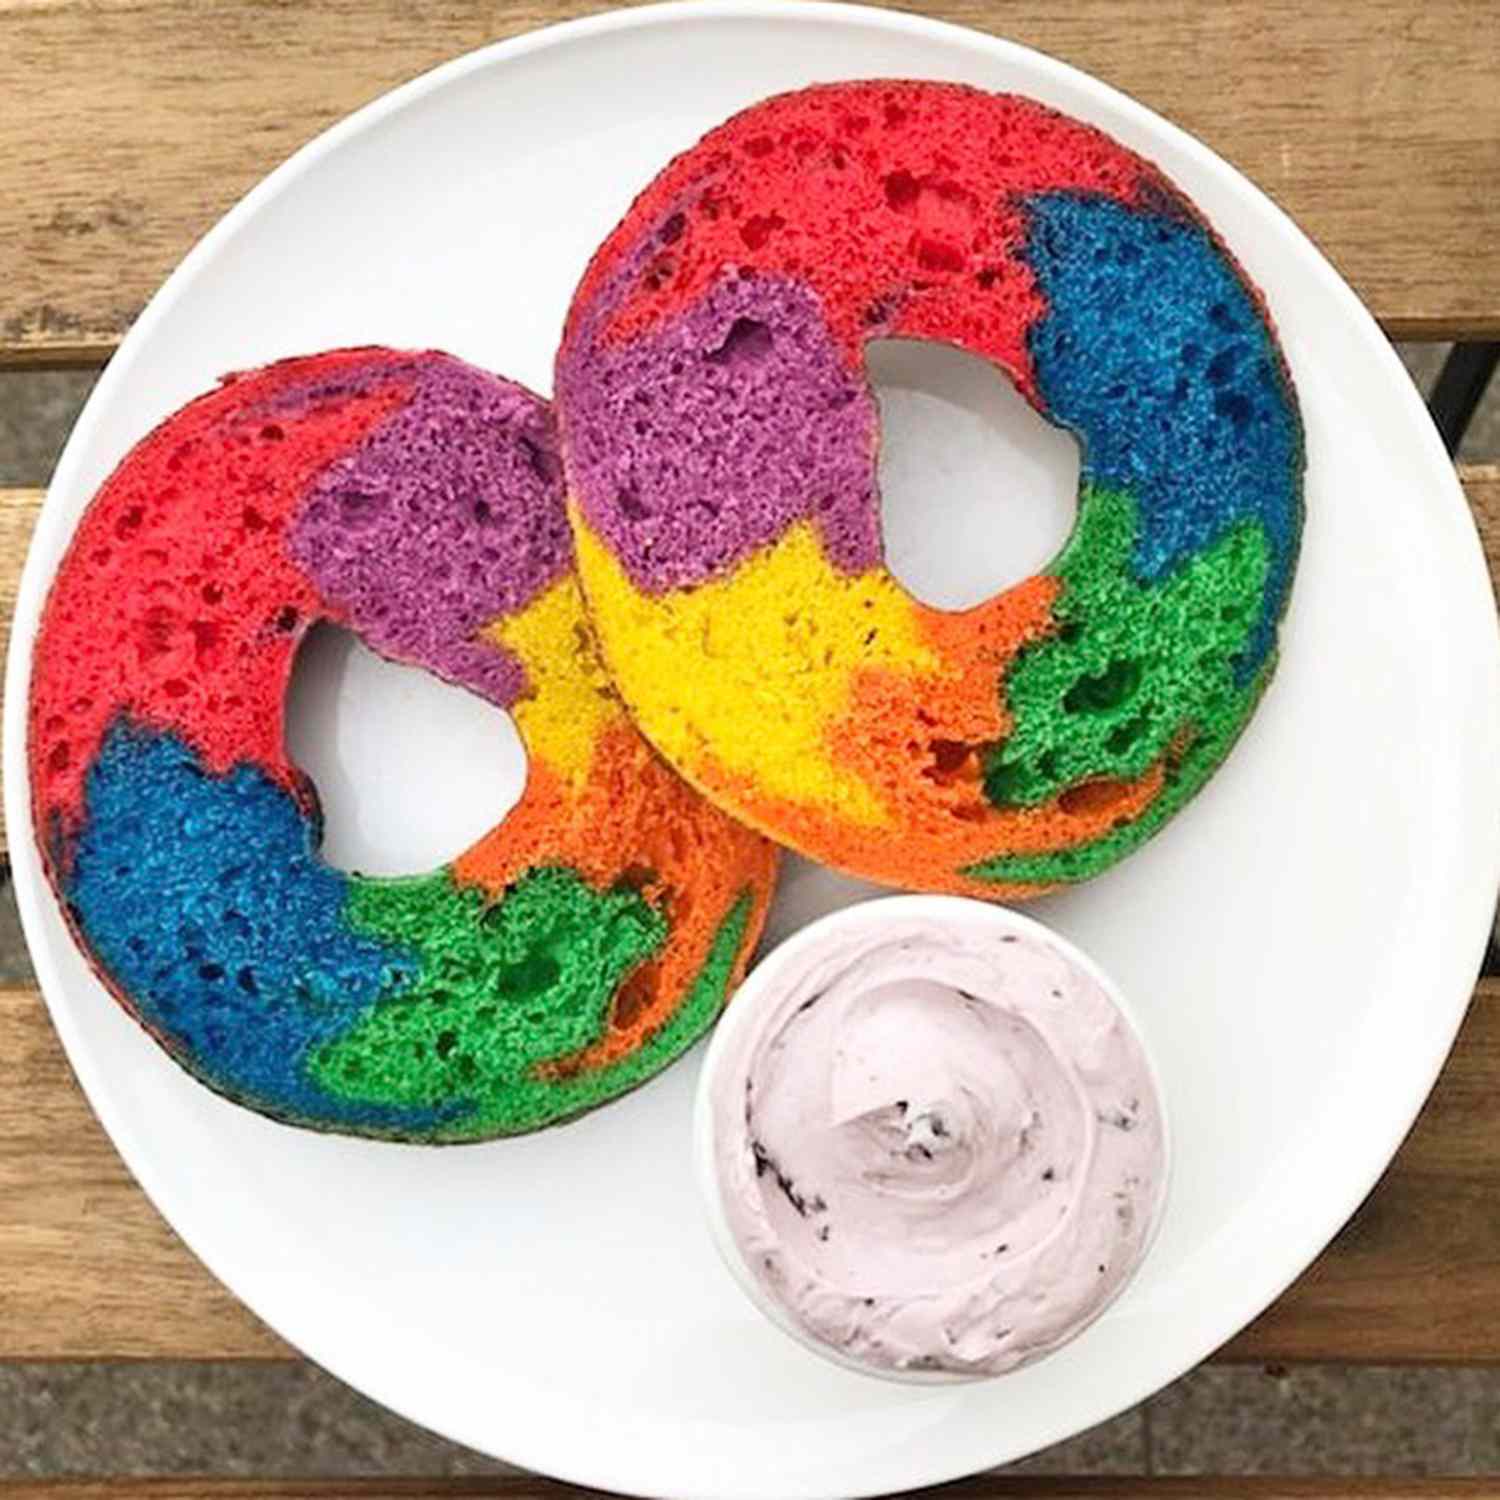 Gallery: All the Restaurants and Bars that are Celebrating PRIDE Month